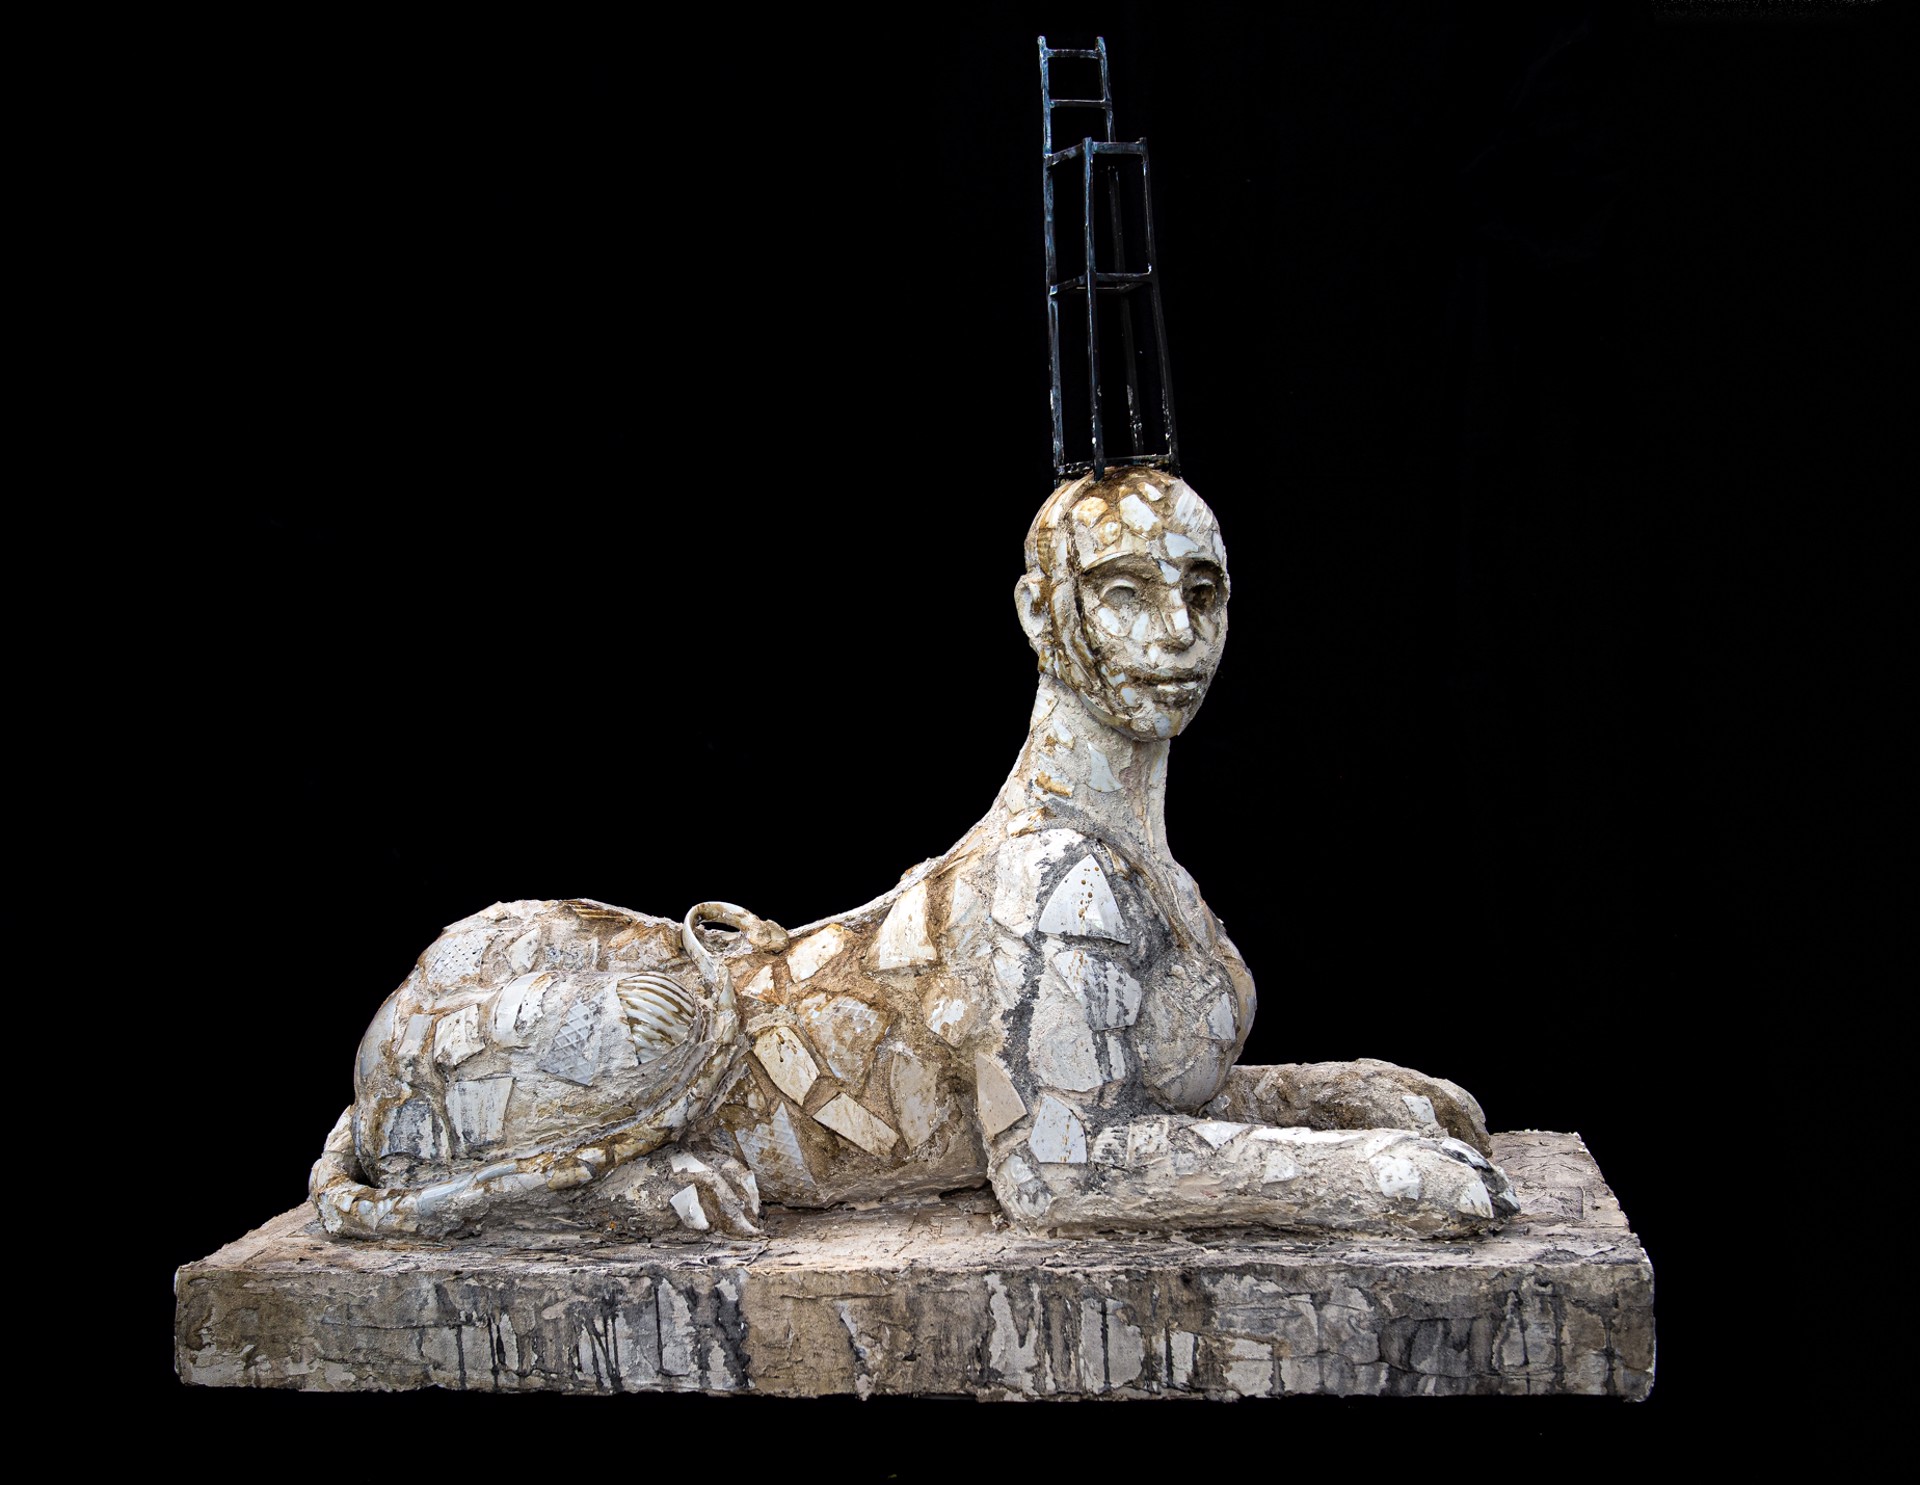 Sphinx by Alla Goniodsky